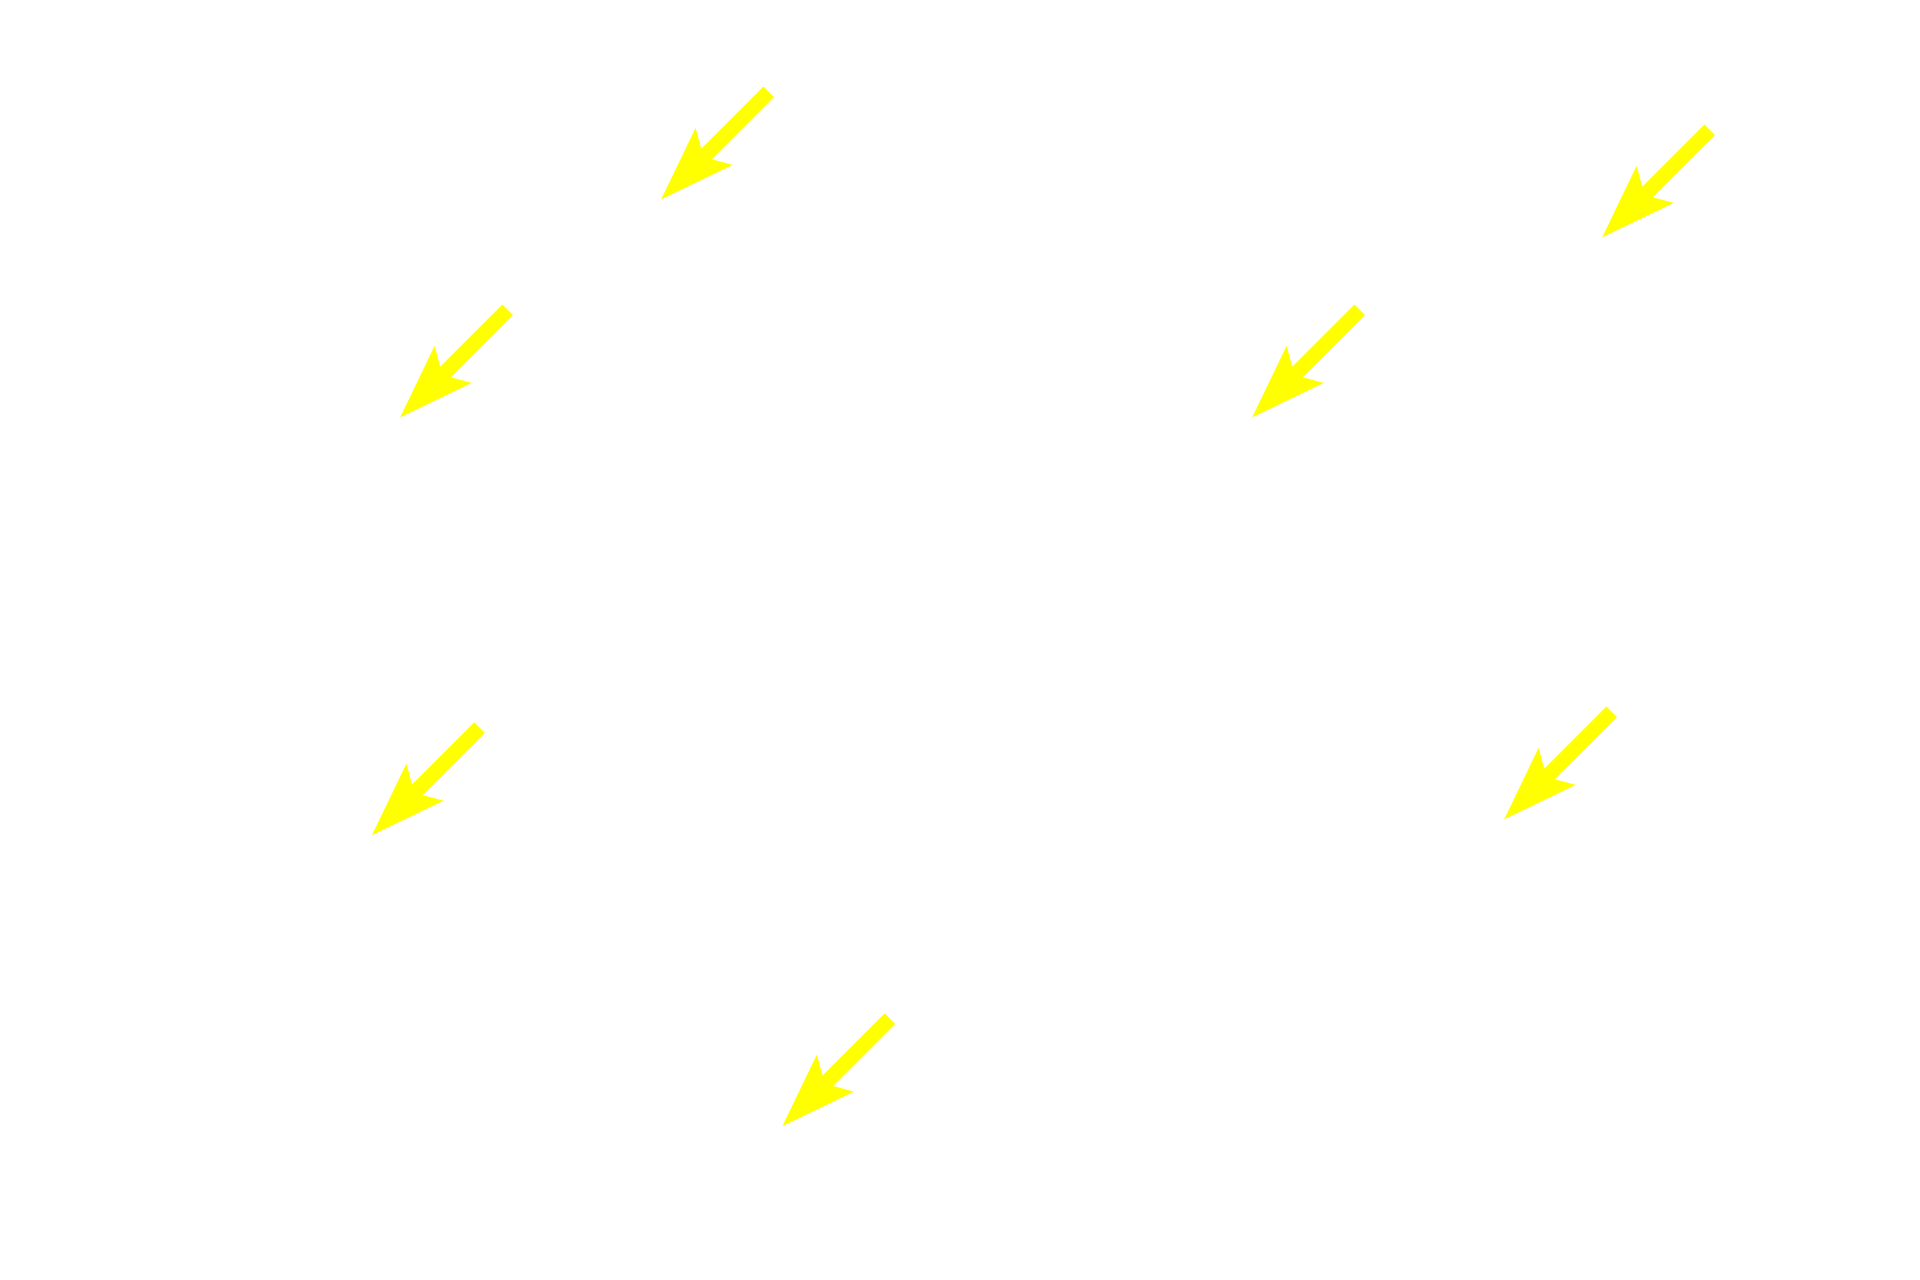 Multipolar neurons <p>These multipolar neurons are located in an autonomic ganglion in the sympathetic division of the autonomic nervous system.  Sympathetic ganglia are generally located at some distance from the organs they innervate and contain large numbers of both incoming preganglionic axons as well as exiting, efferent postganglionic axons from the multipolar neurons.  The neuron cell bodies are widely dispersed and extend numerous dendrites.  Eccentrically-located nuclei are common. 100x, 1000x</p>
